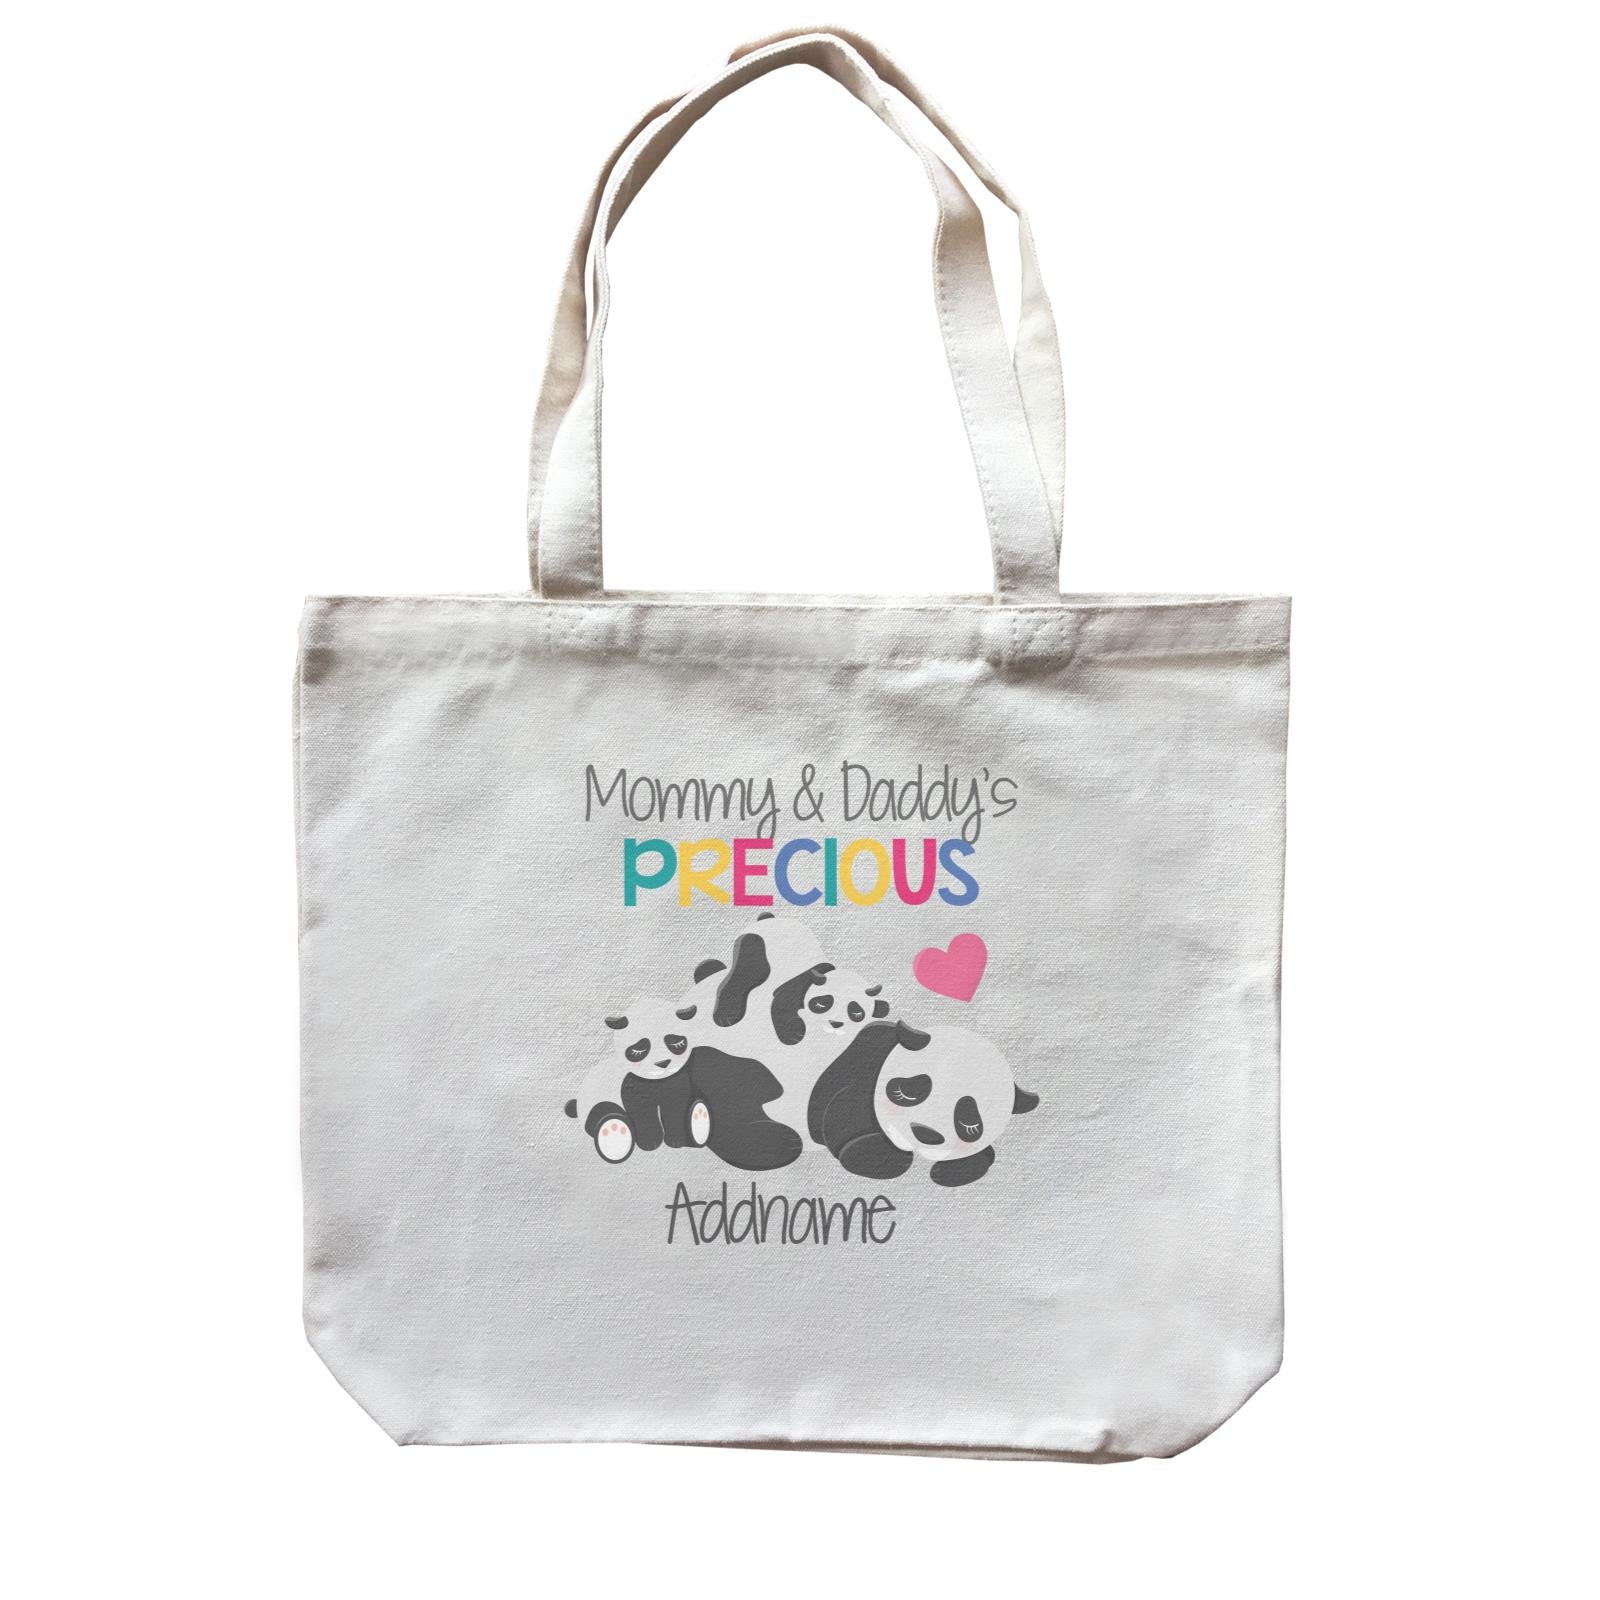 Animal & Loved Ones Mommy & Daddy's Precious Panda Family Addname Canvas Bag